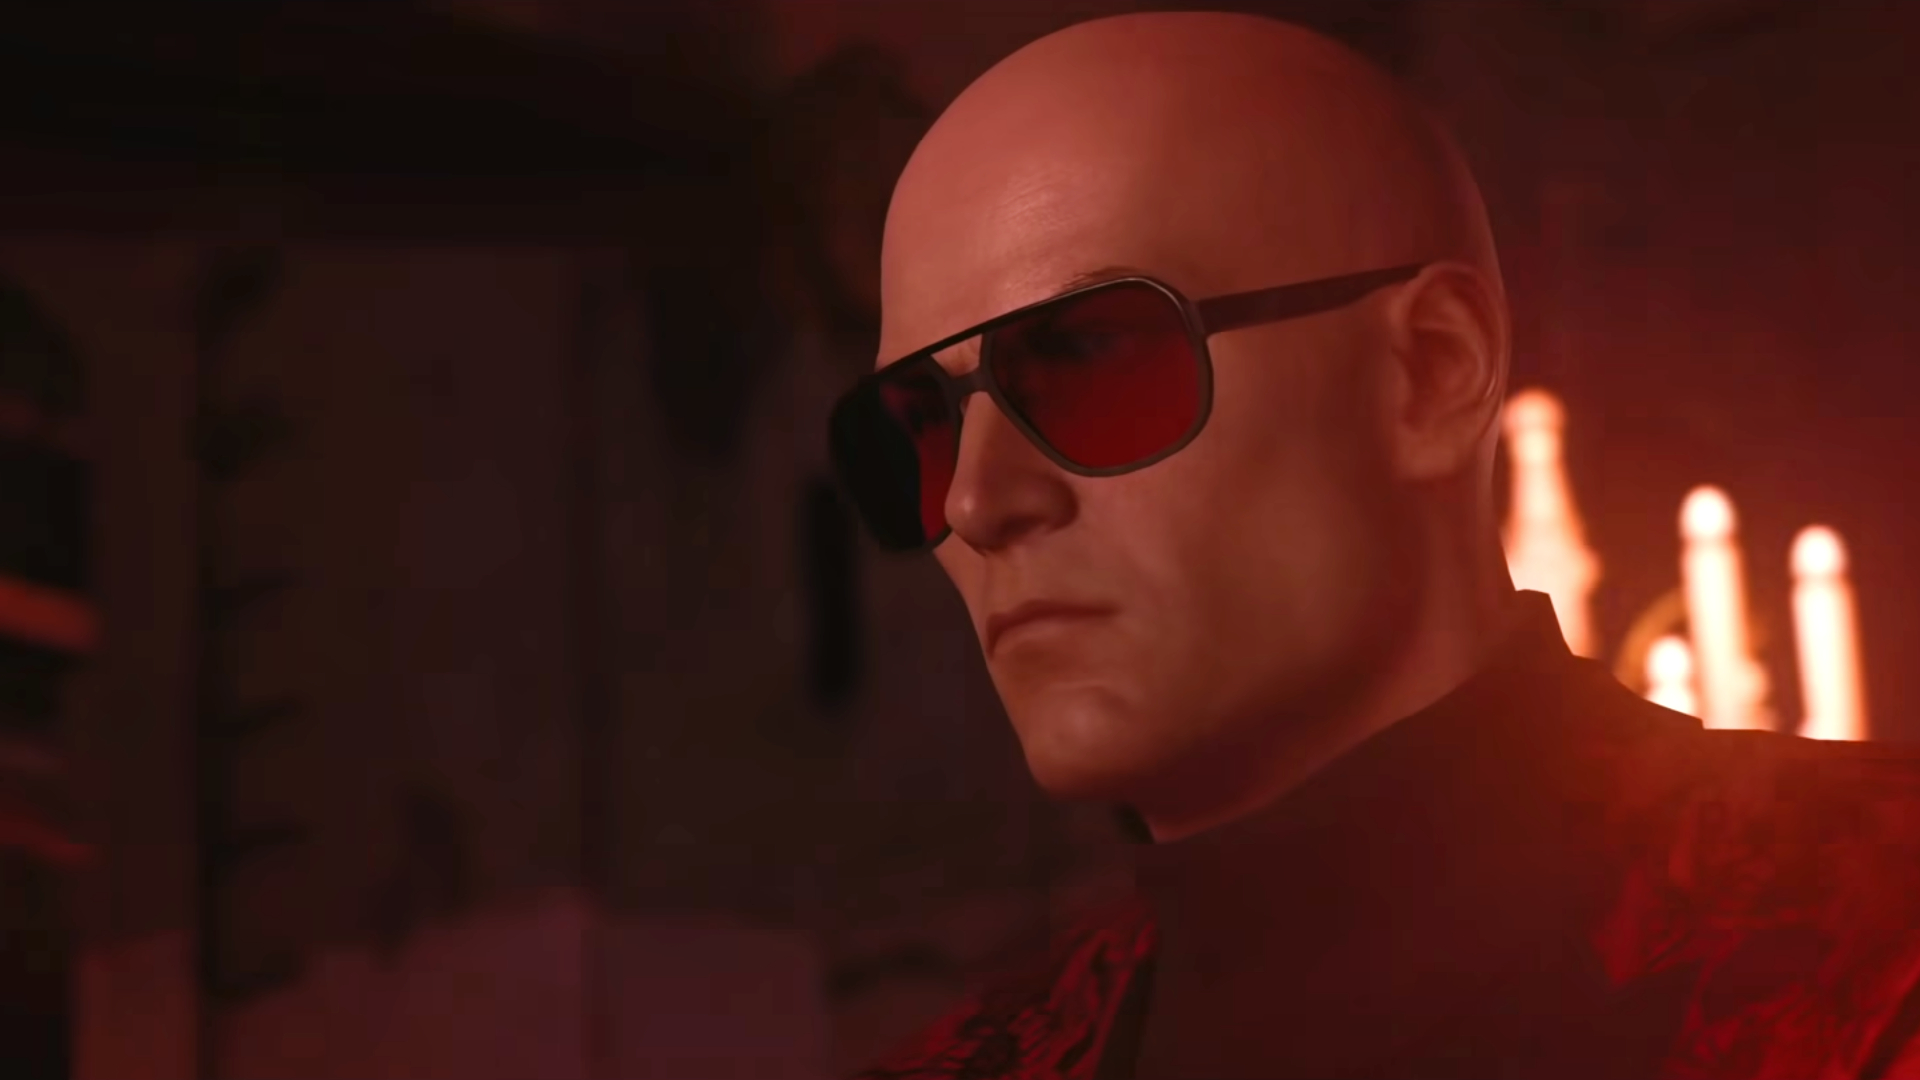 Agent 47 Gets A Snazzy New Suit In Hitman 3 Pride DLC Trailer